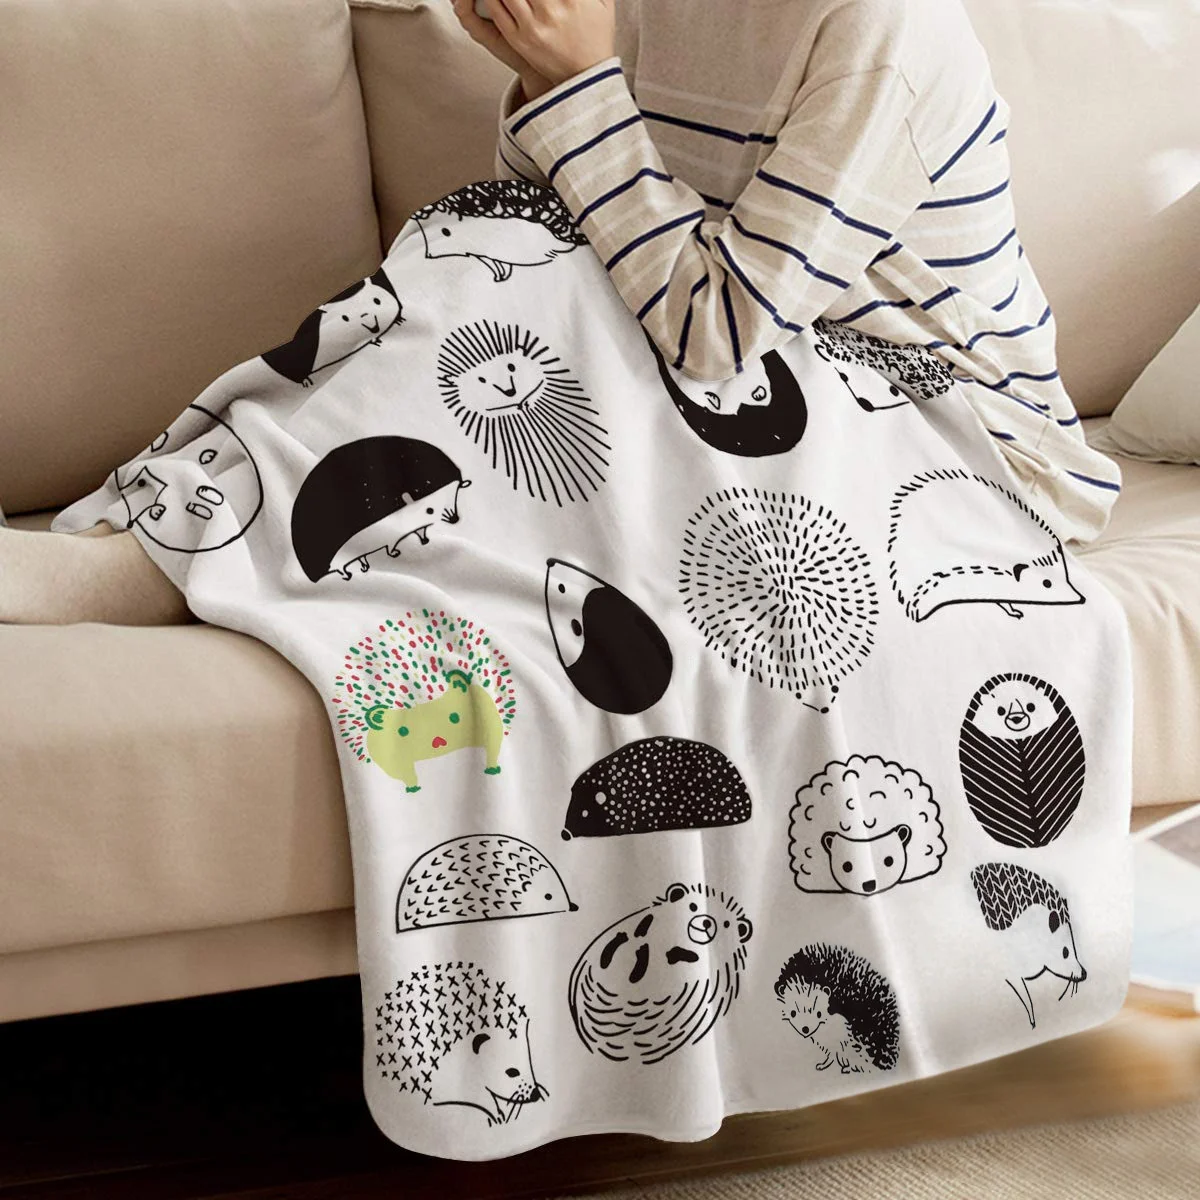 

Cartoon Hedgehog Flannel Blanket For Kids Boys Girls Christmas Gifts Picnic Travel Bed Sofa Chair Applicable All Season Blanket